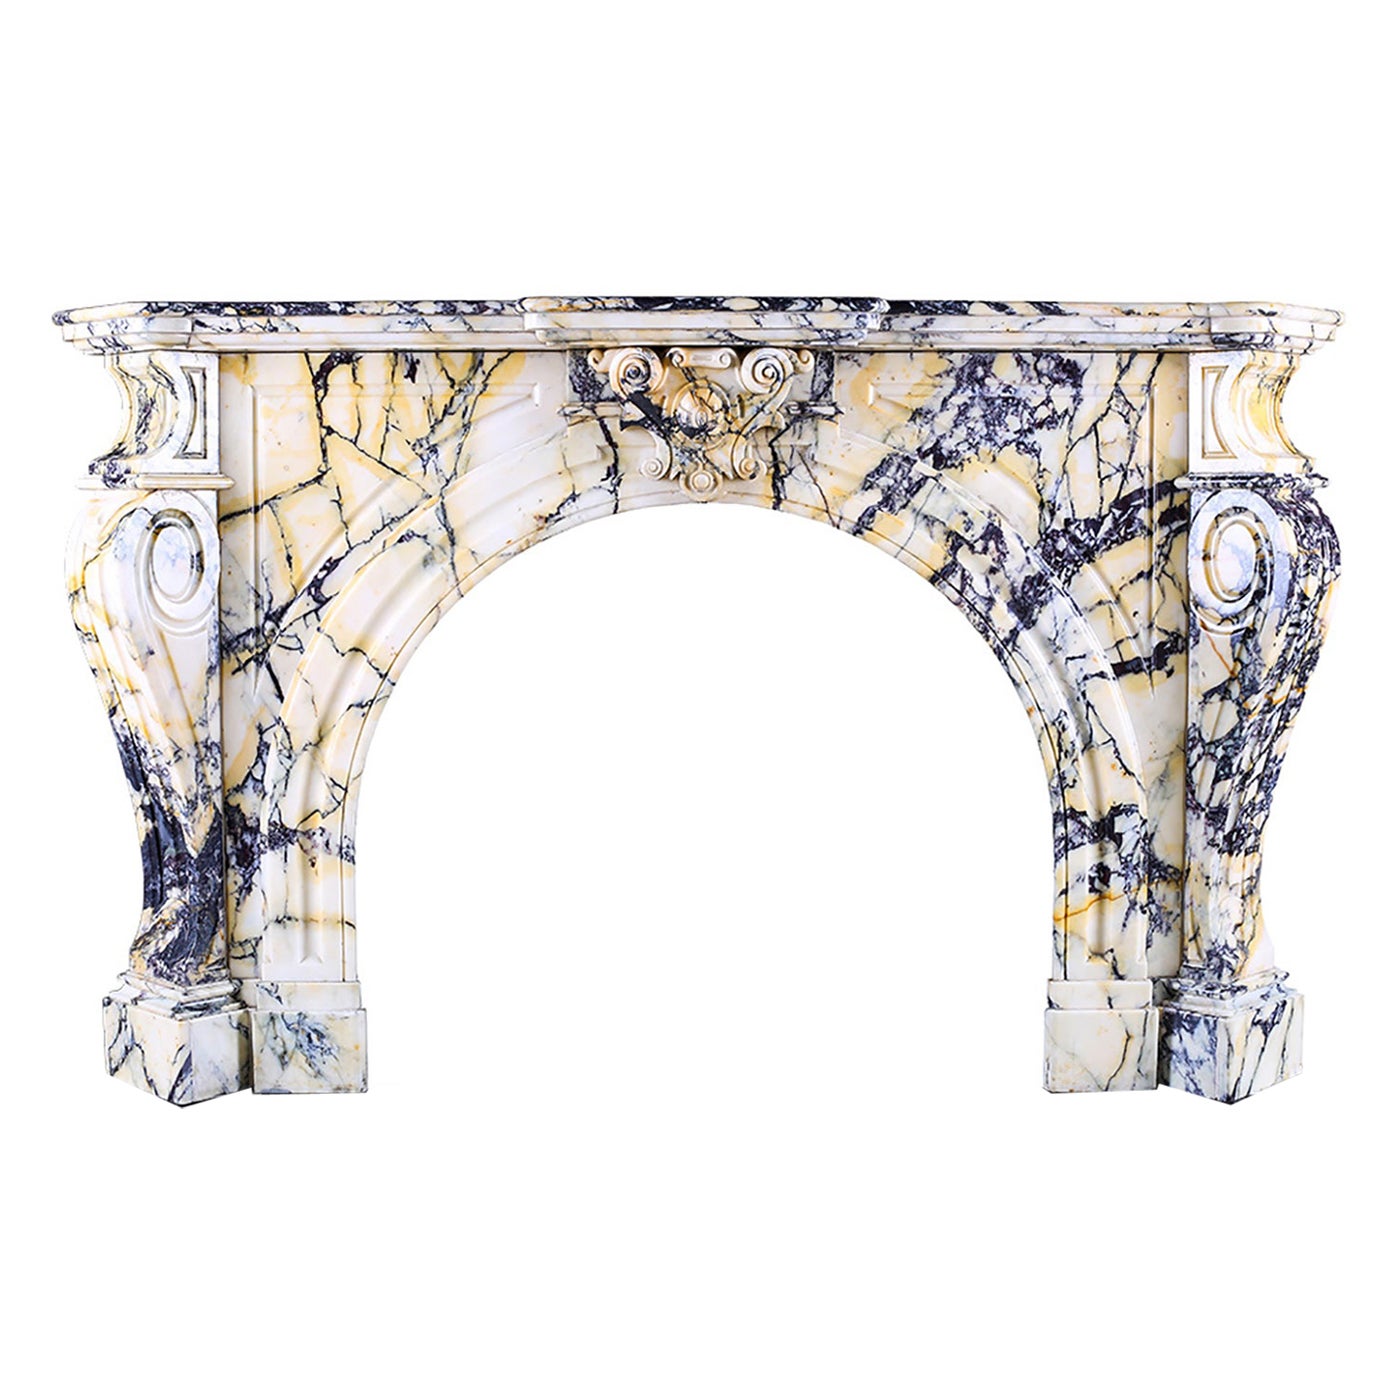 Grand Arched Pavonazza Marble Antique Chimneypiece, Belgian Mid-19th Century For Sale